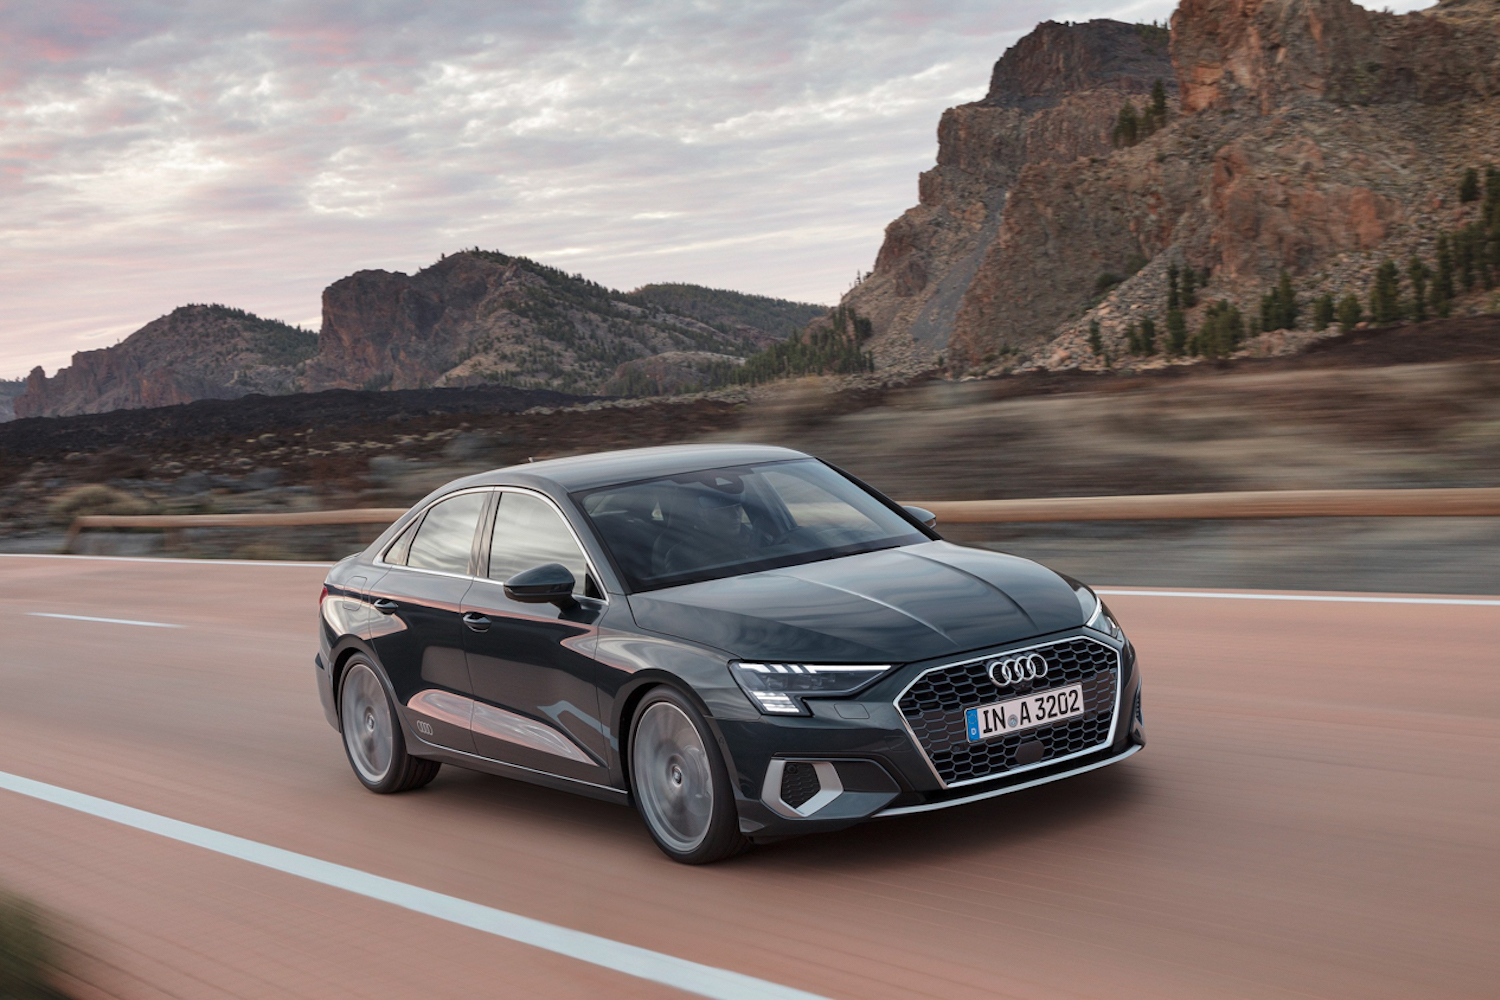 New Audi A3 arrives in Ireland